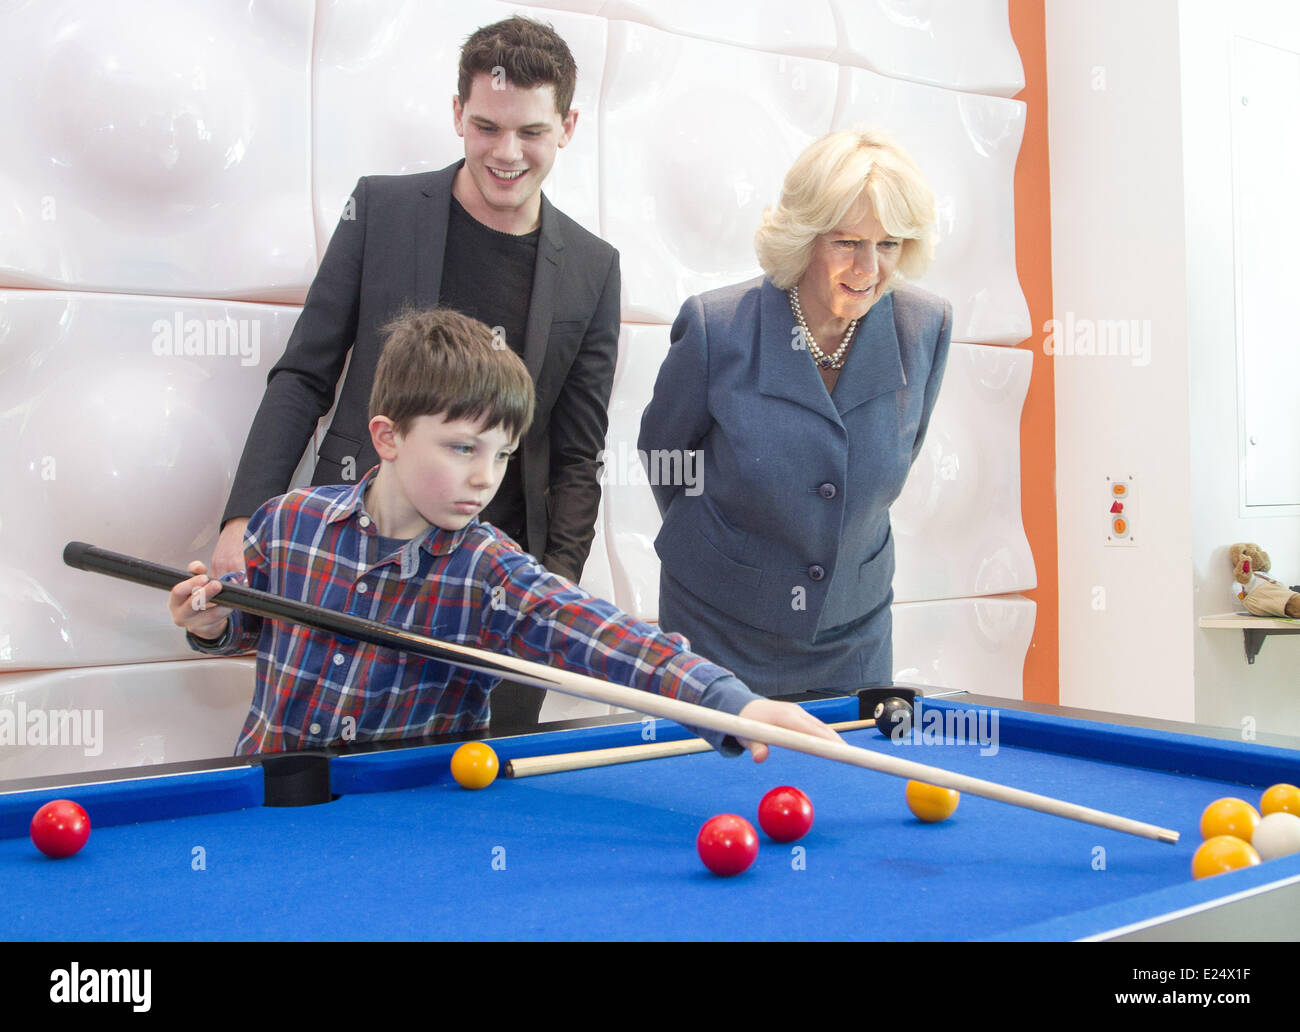 Camilla, Duchess of Cornwall, meets diabetes patients and their families in the University College Hospital Inpatient Adolescent Ward and tours the ward's school room and games room before attending a reception with staff and JDRF supporters at The University College Hospital. Camilla, who is President of the JDRF type 1 diabetes charity, plays pool with a young patient at the unit and War Horse actor Jeremy Irvine, who suffers from the condition  Featuring: Camilla,Duchess of Cornwall,Jeremy Irvine Where: London, Royaume Uni When: 31 Jan 2013 Stock Photo